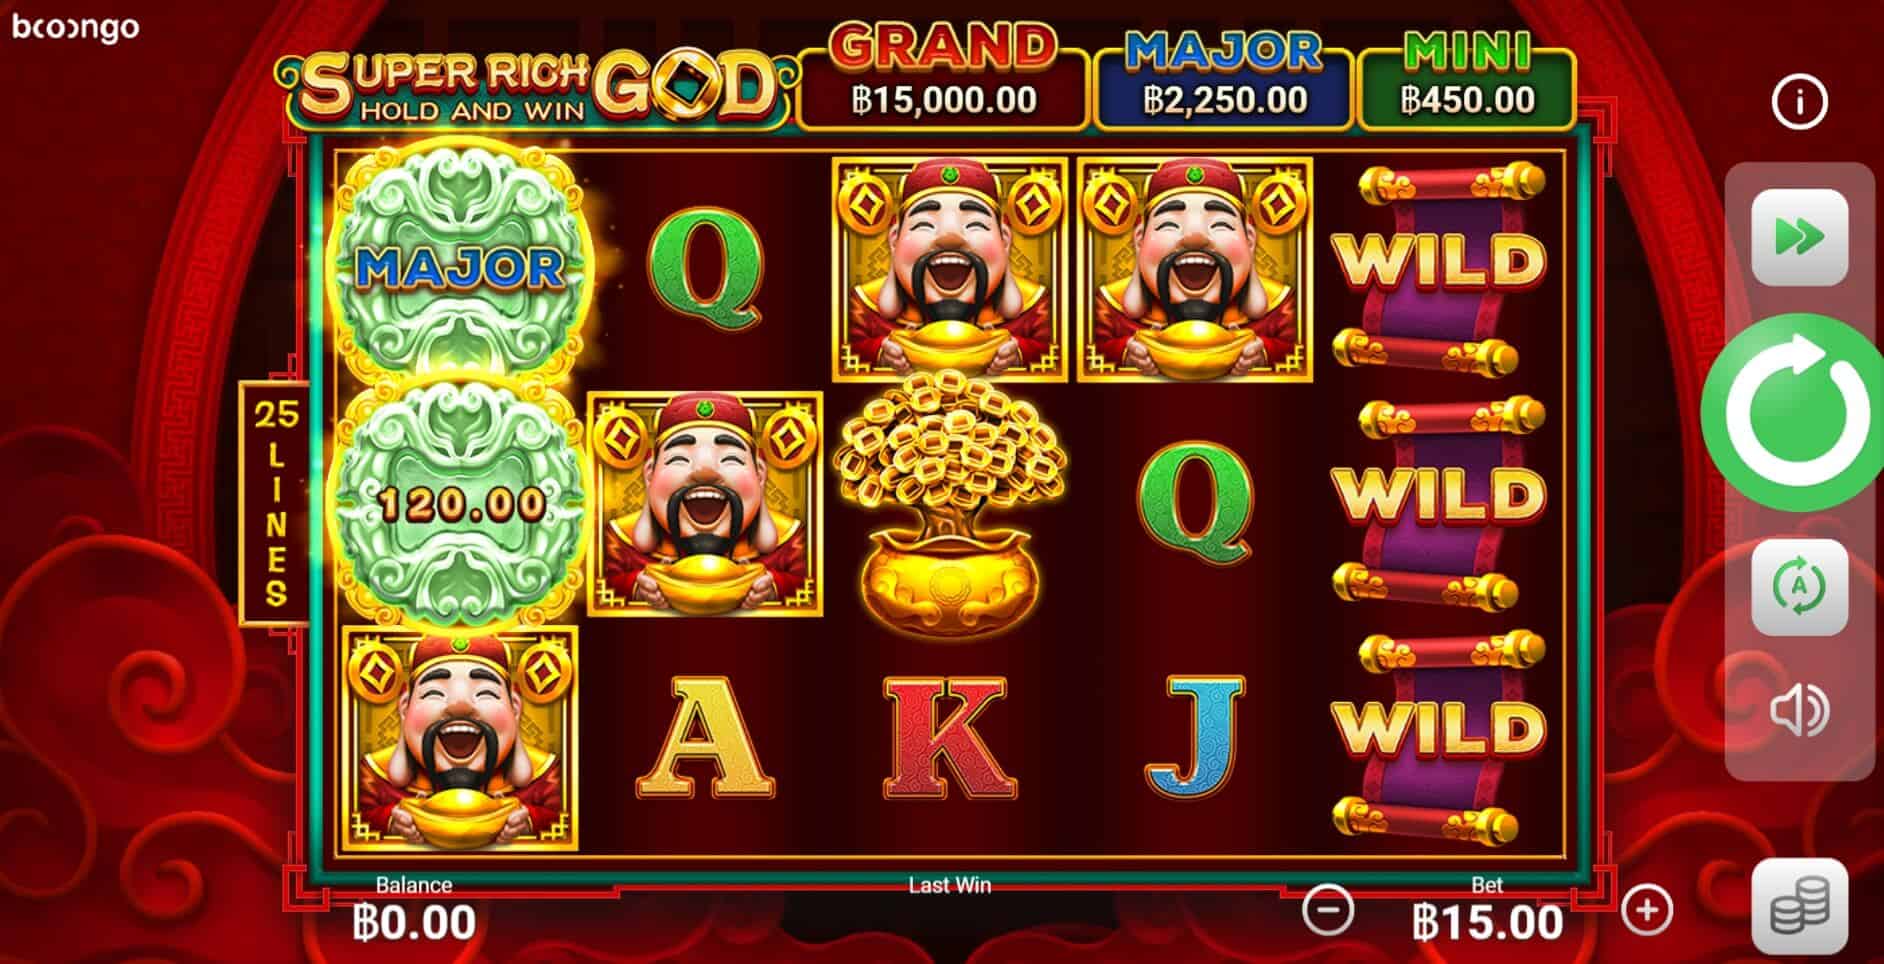 Super Rich God1 Hold And Win BOOONGO SLOTXO1234